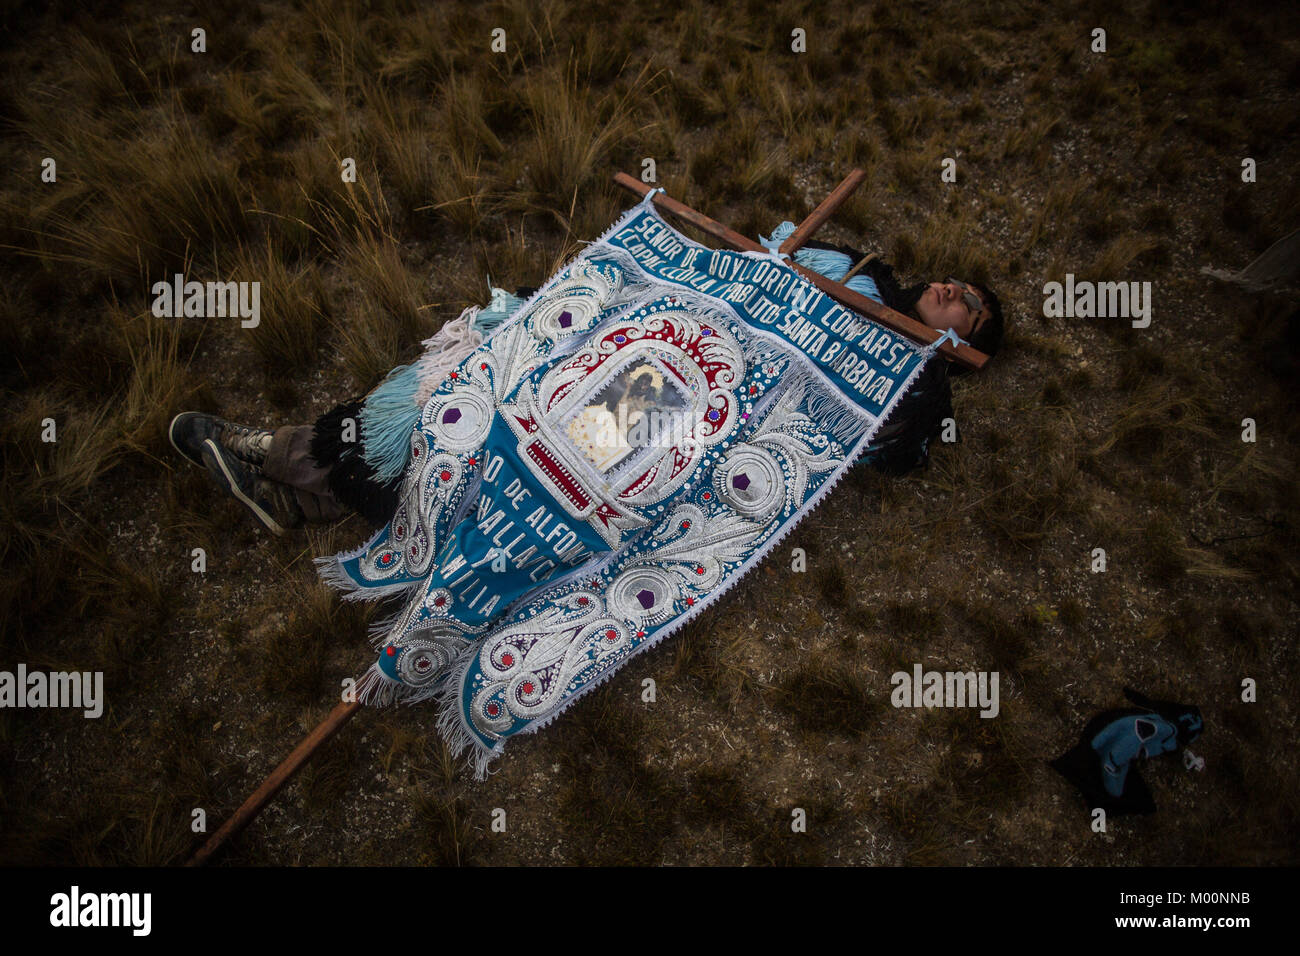 Cusco, Peru. 29th Dec, 2017. Member of the troupe of Canchis nation seen resting before performing the pilgrimage the hoyada of Sinancara to Mahuayani for the ceremony of Into Alavado.Quyllur Rit'i or Star Snow Festival is a spiritual and religious festival held Annually at the Sinakara Valley in the Cusco Region of Peru. Groups of Quero indigenous people climb Ausangate Mountain, at 6362m, in search of the Snow Star Which is reputedly buried Within the mountain.According to the chroniclers, the Qoyllur Rit'i is the Christ that the Church sent painted on a rock at almost 5,000 meters ab Stock Photo